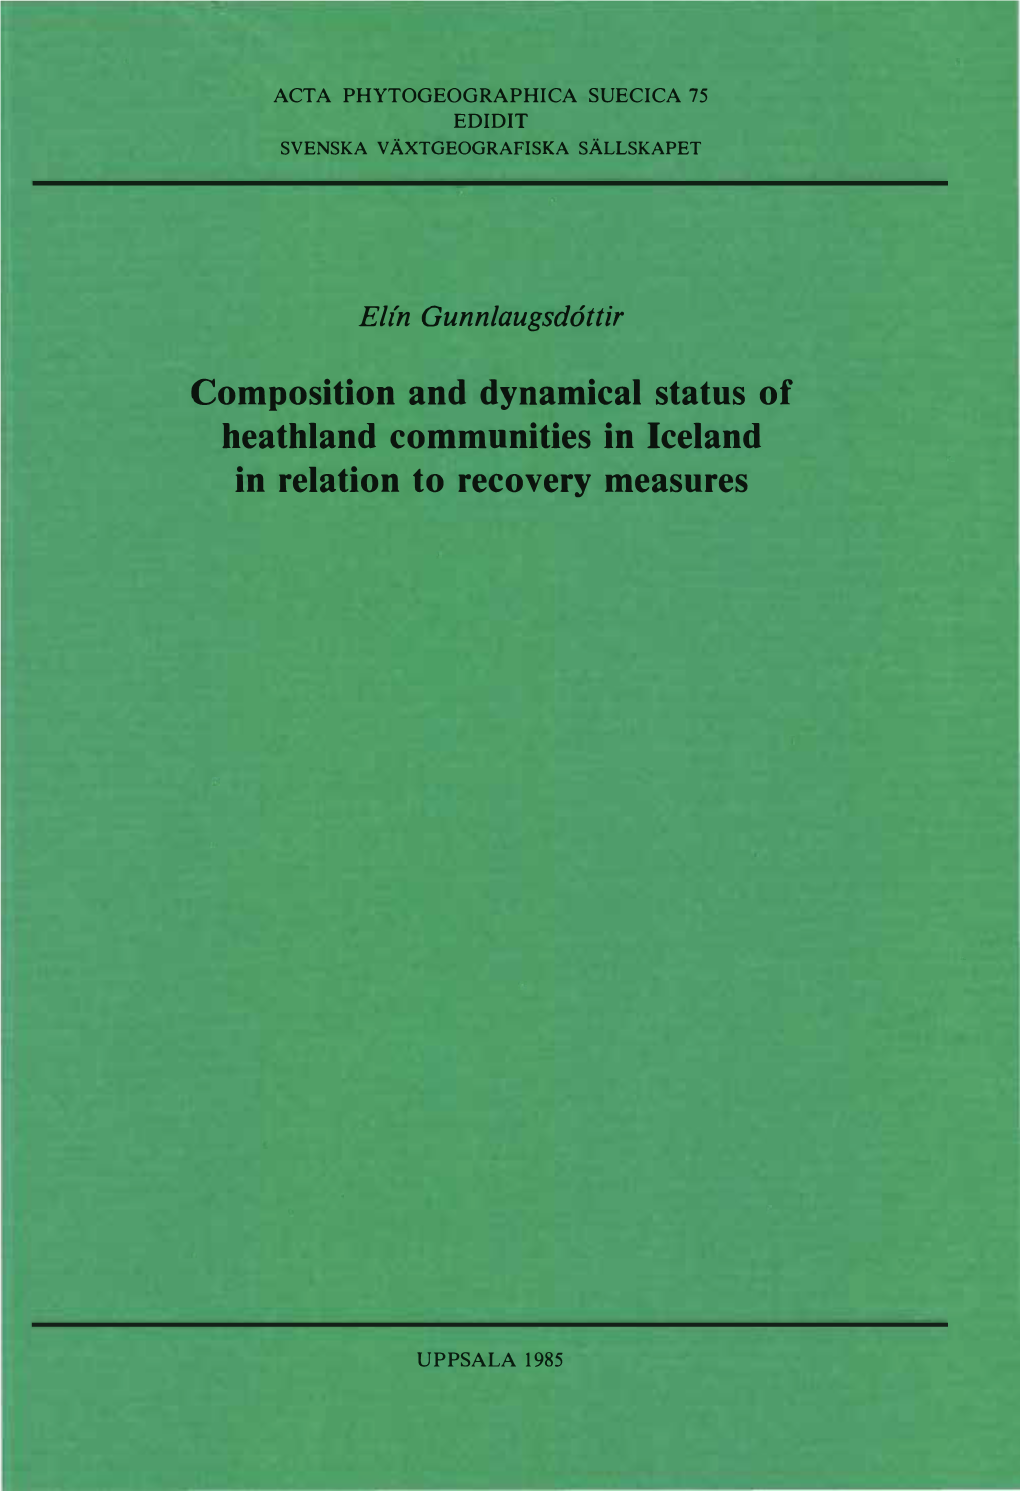 Composition and Dynamical Status of Heathland Communities in Iceland in Relation to Recovery Measures